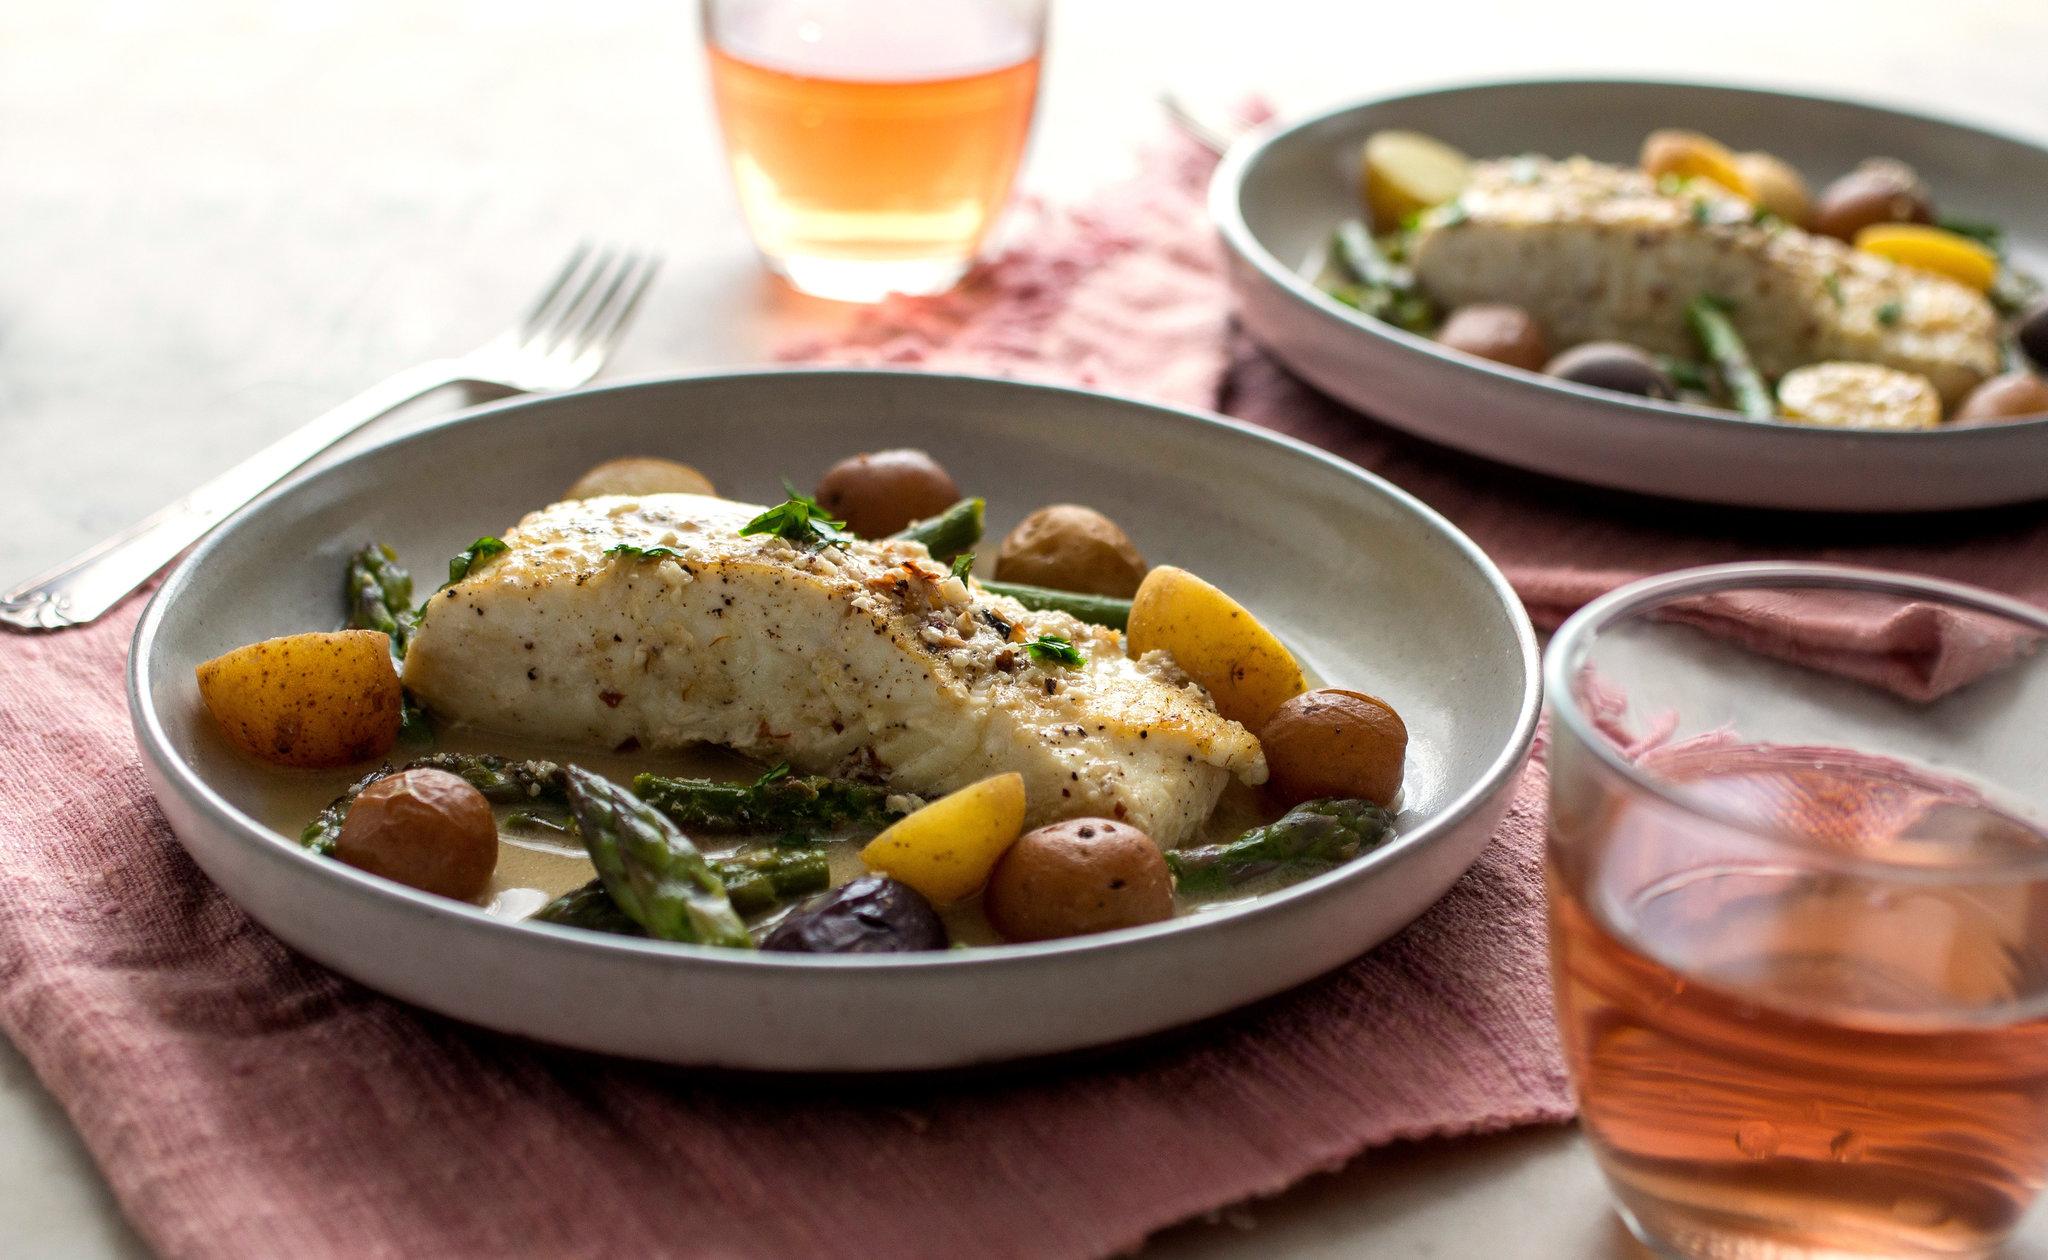 Halibut with New Potatoes and Green Beans